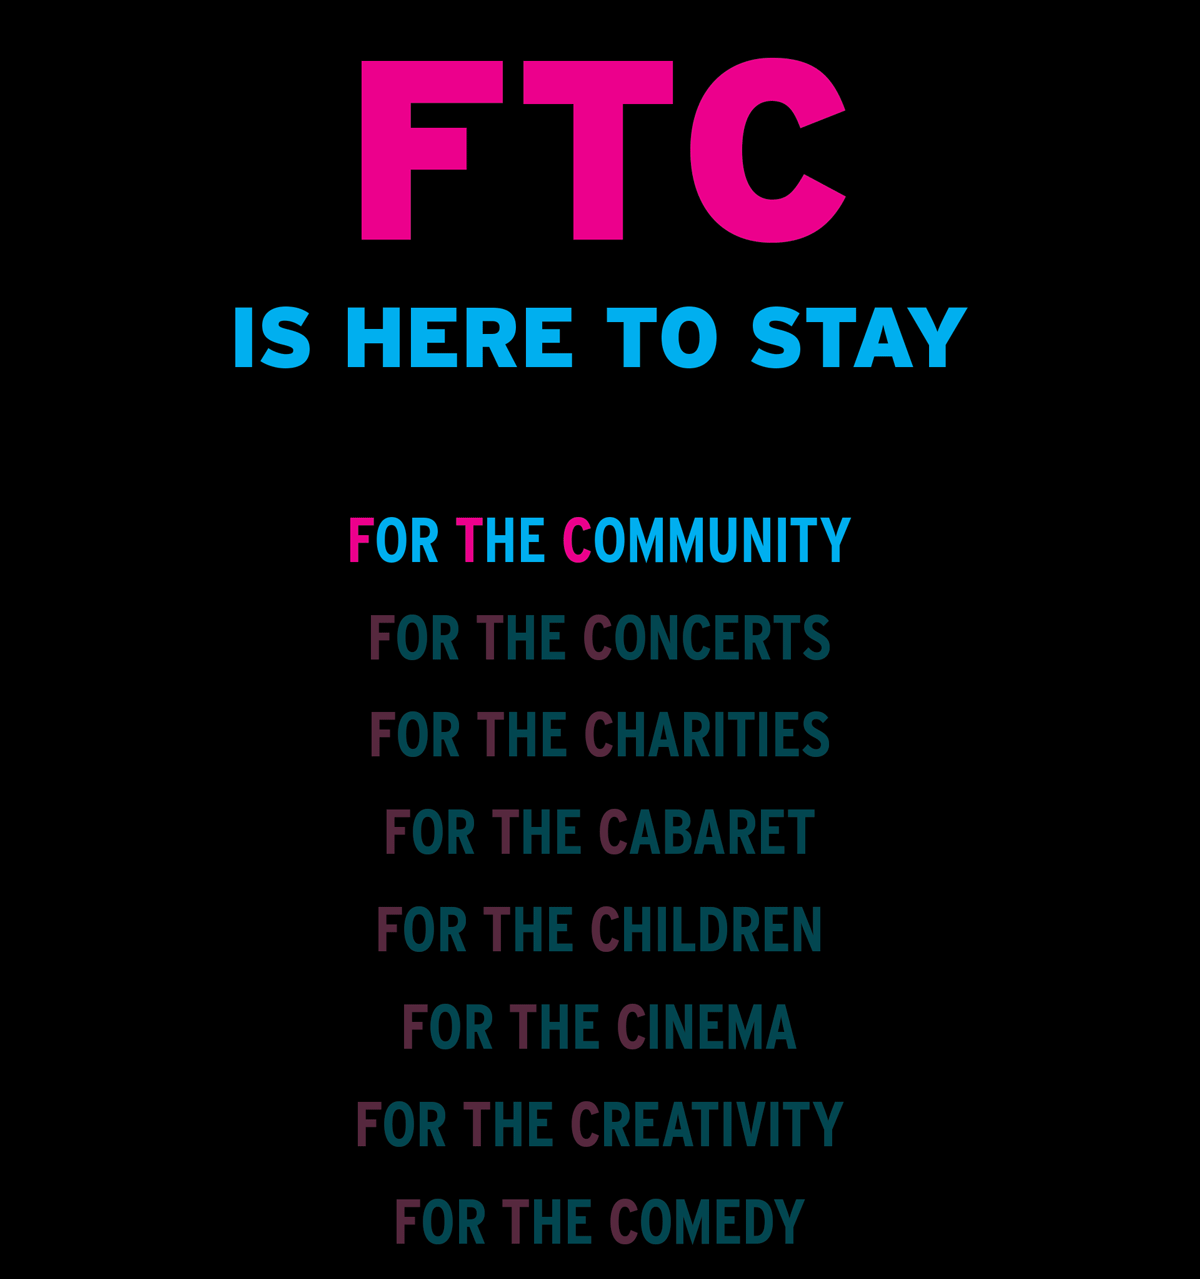 FTC IS HERE TO STAY